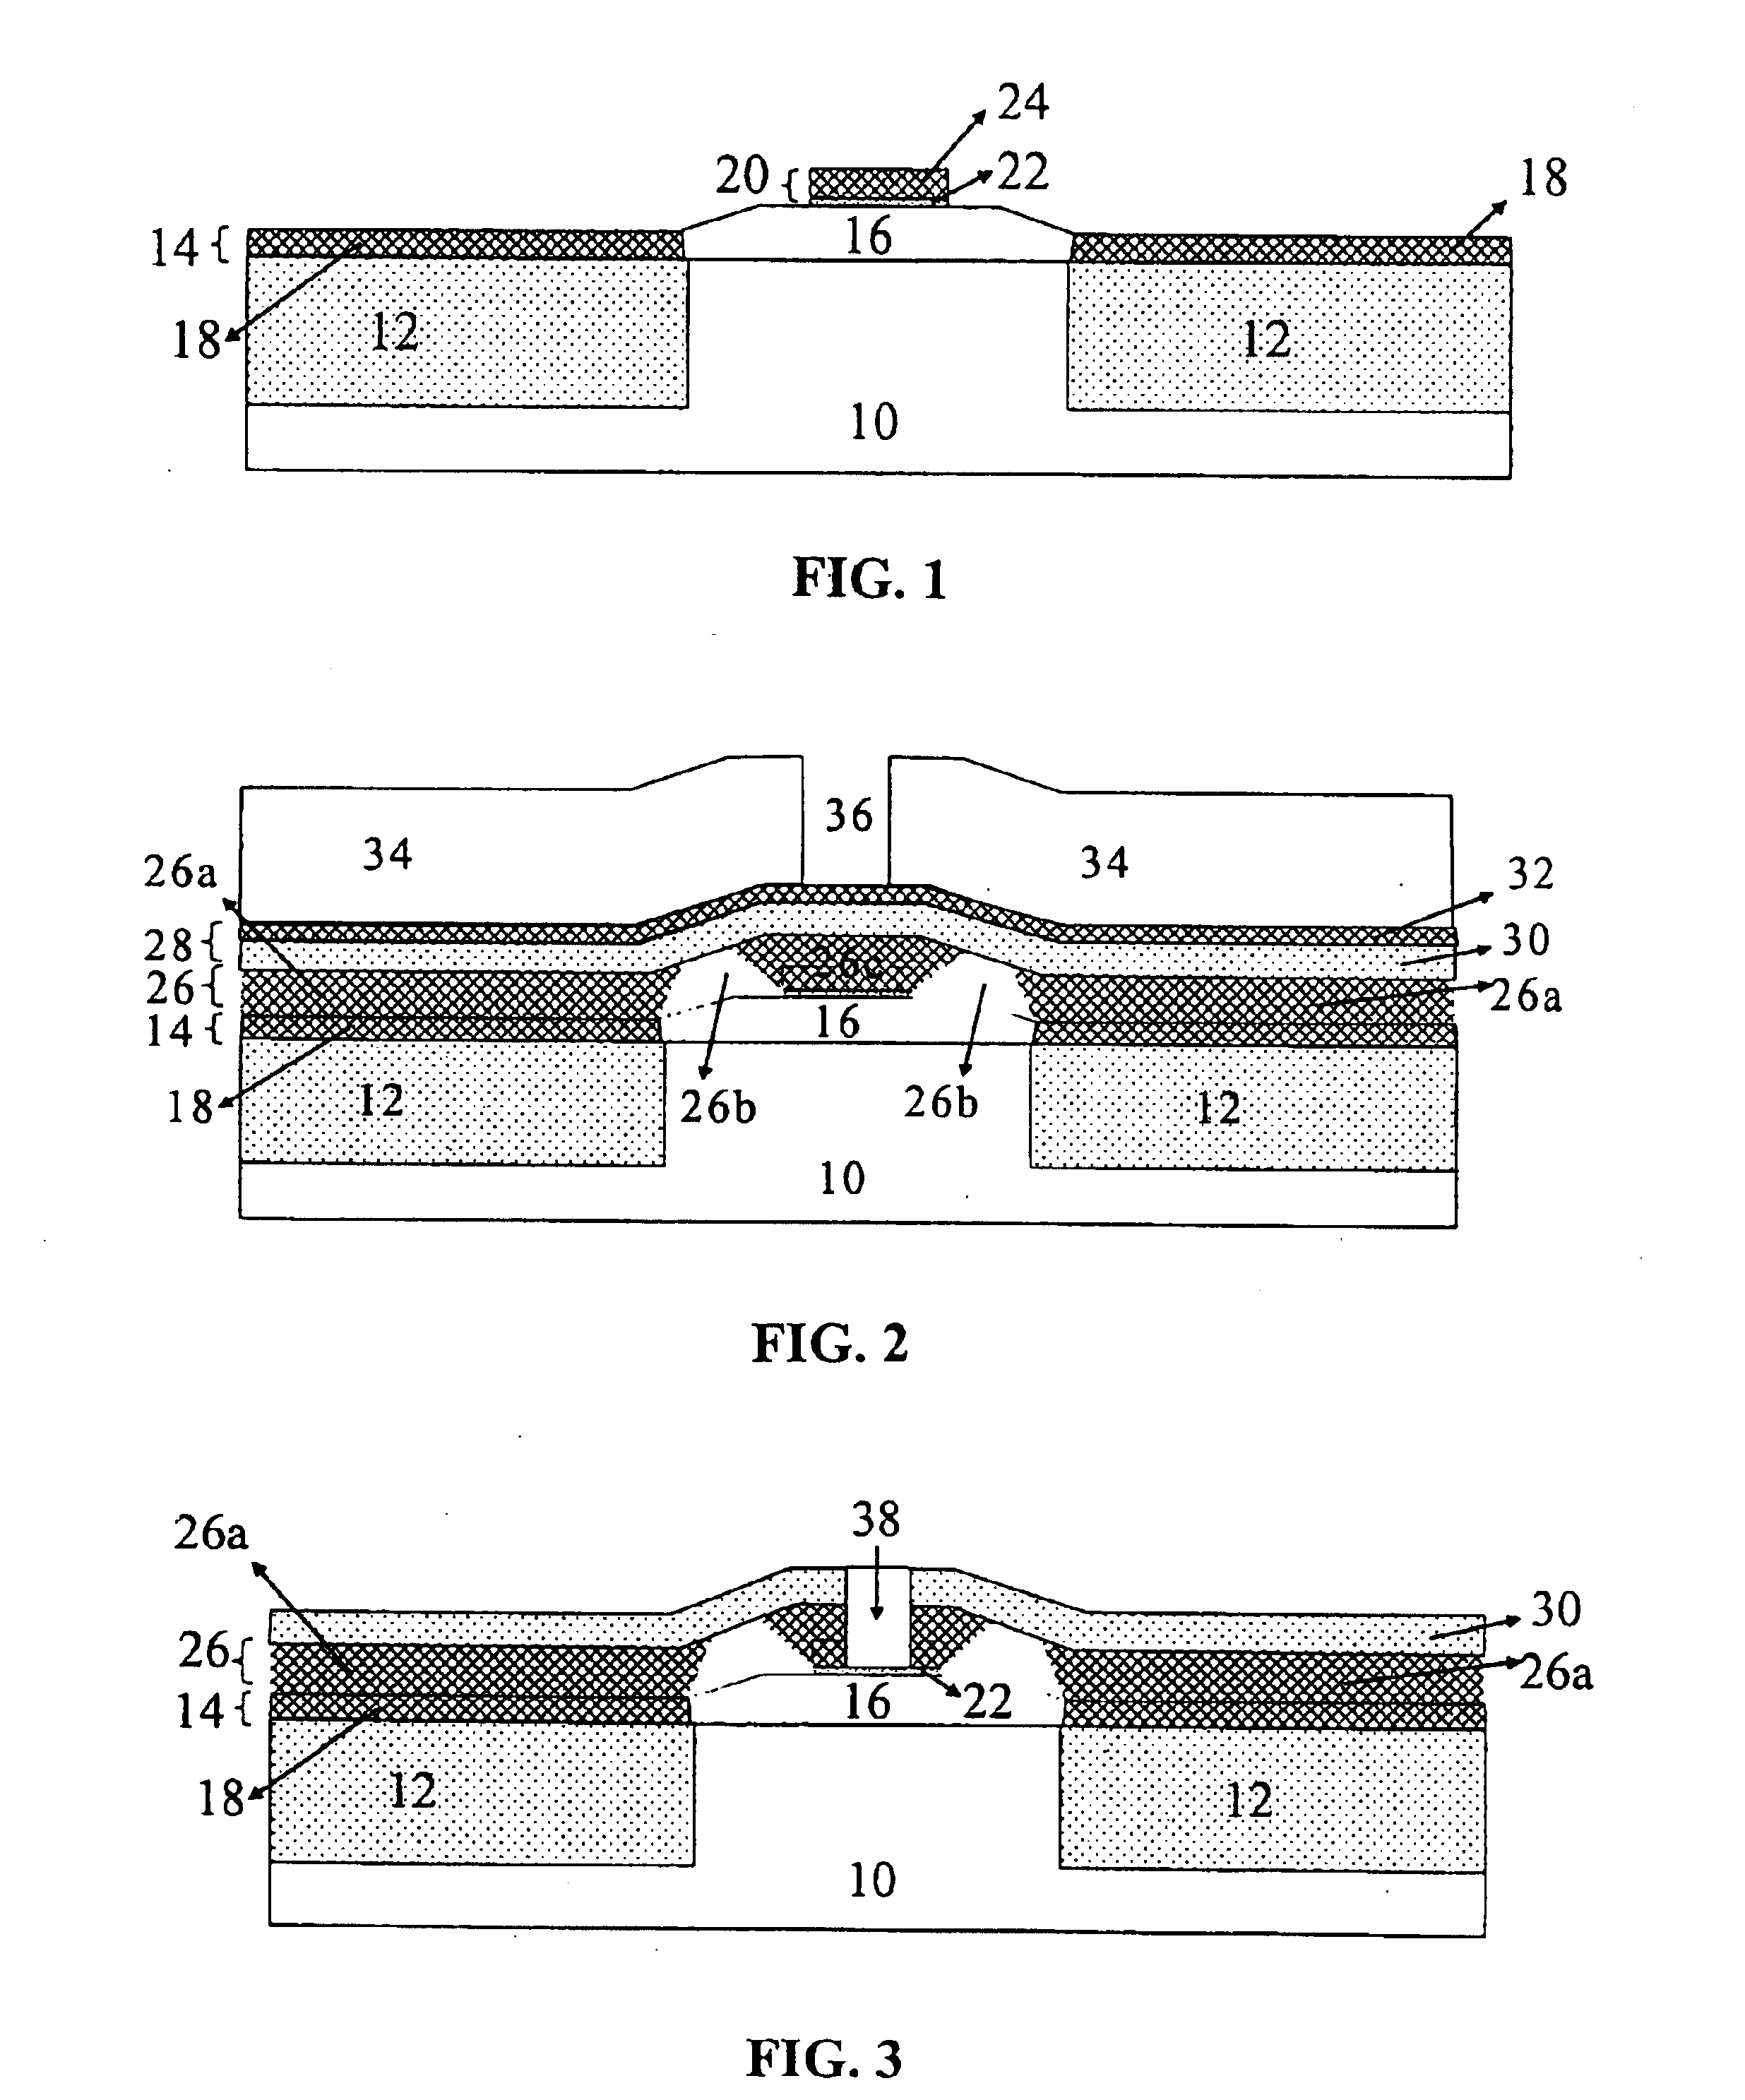 Method to fabricate high-performance NPN transistors in a BiCMOS process